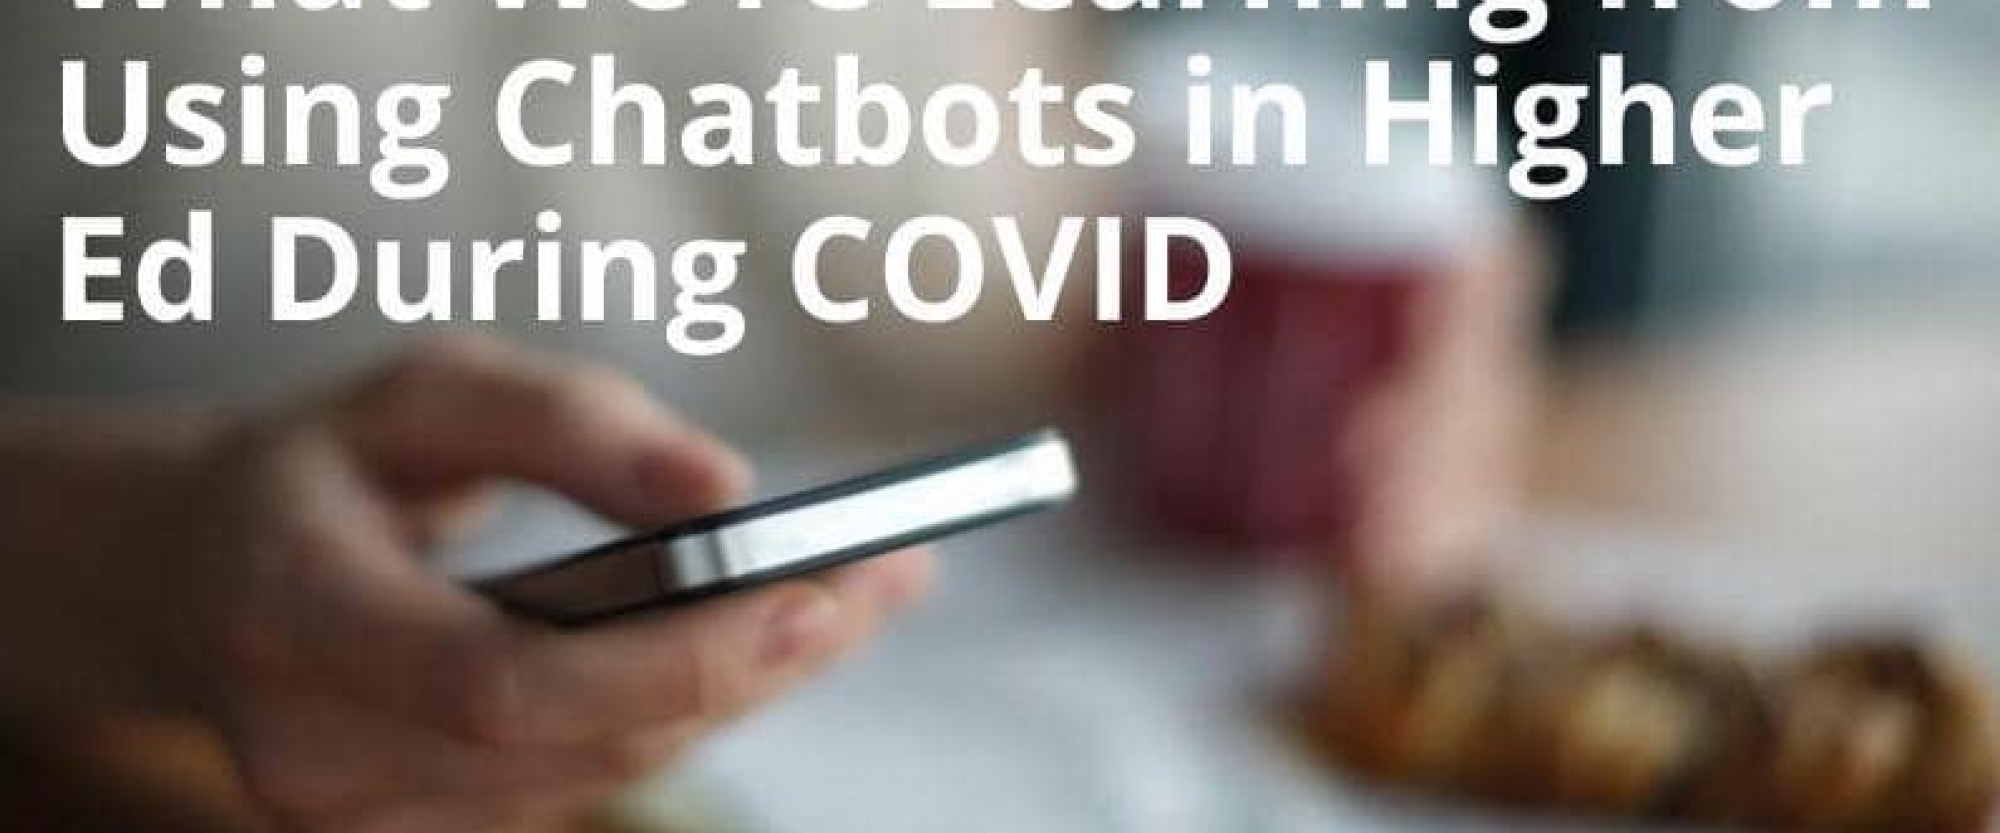 What We're Learning from Using Chatbots in Higher Ed During Covid